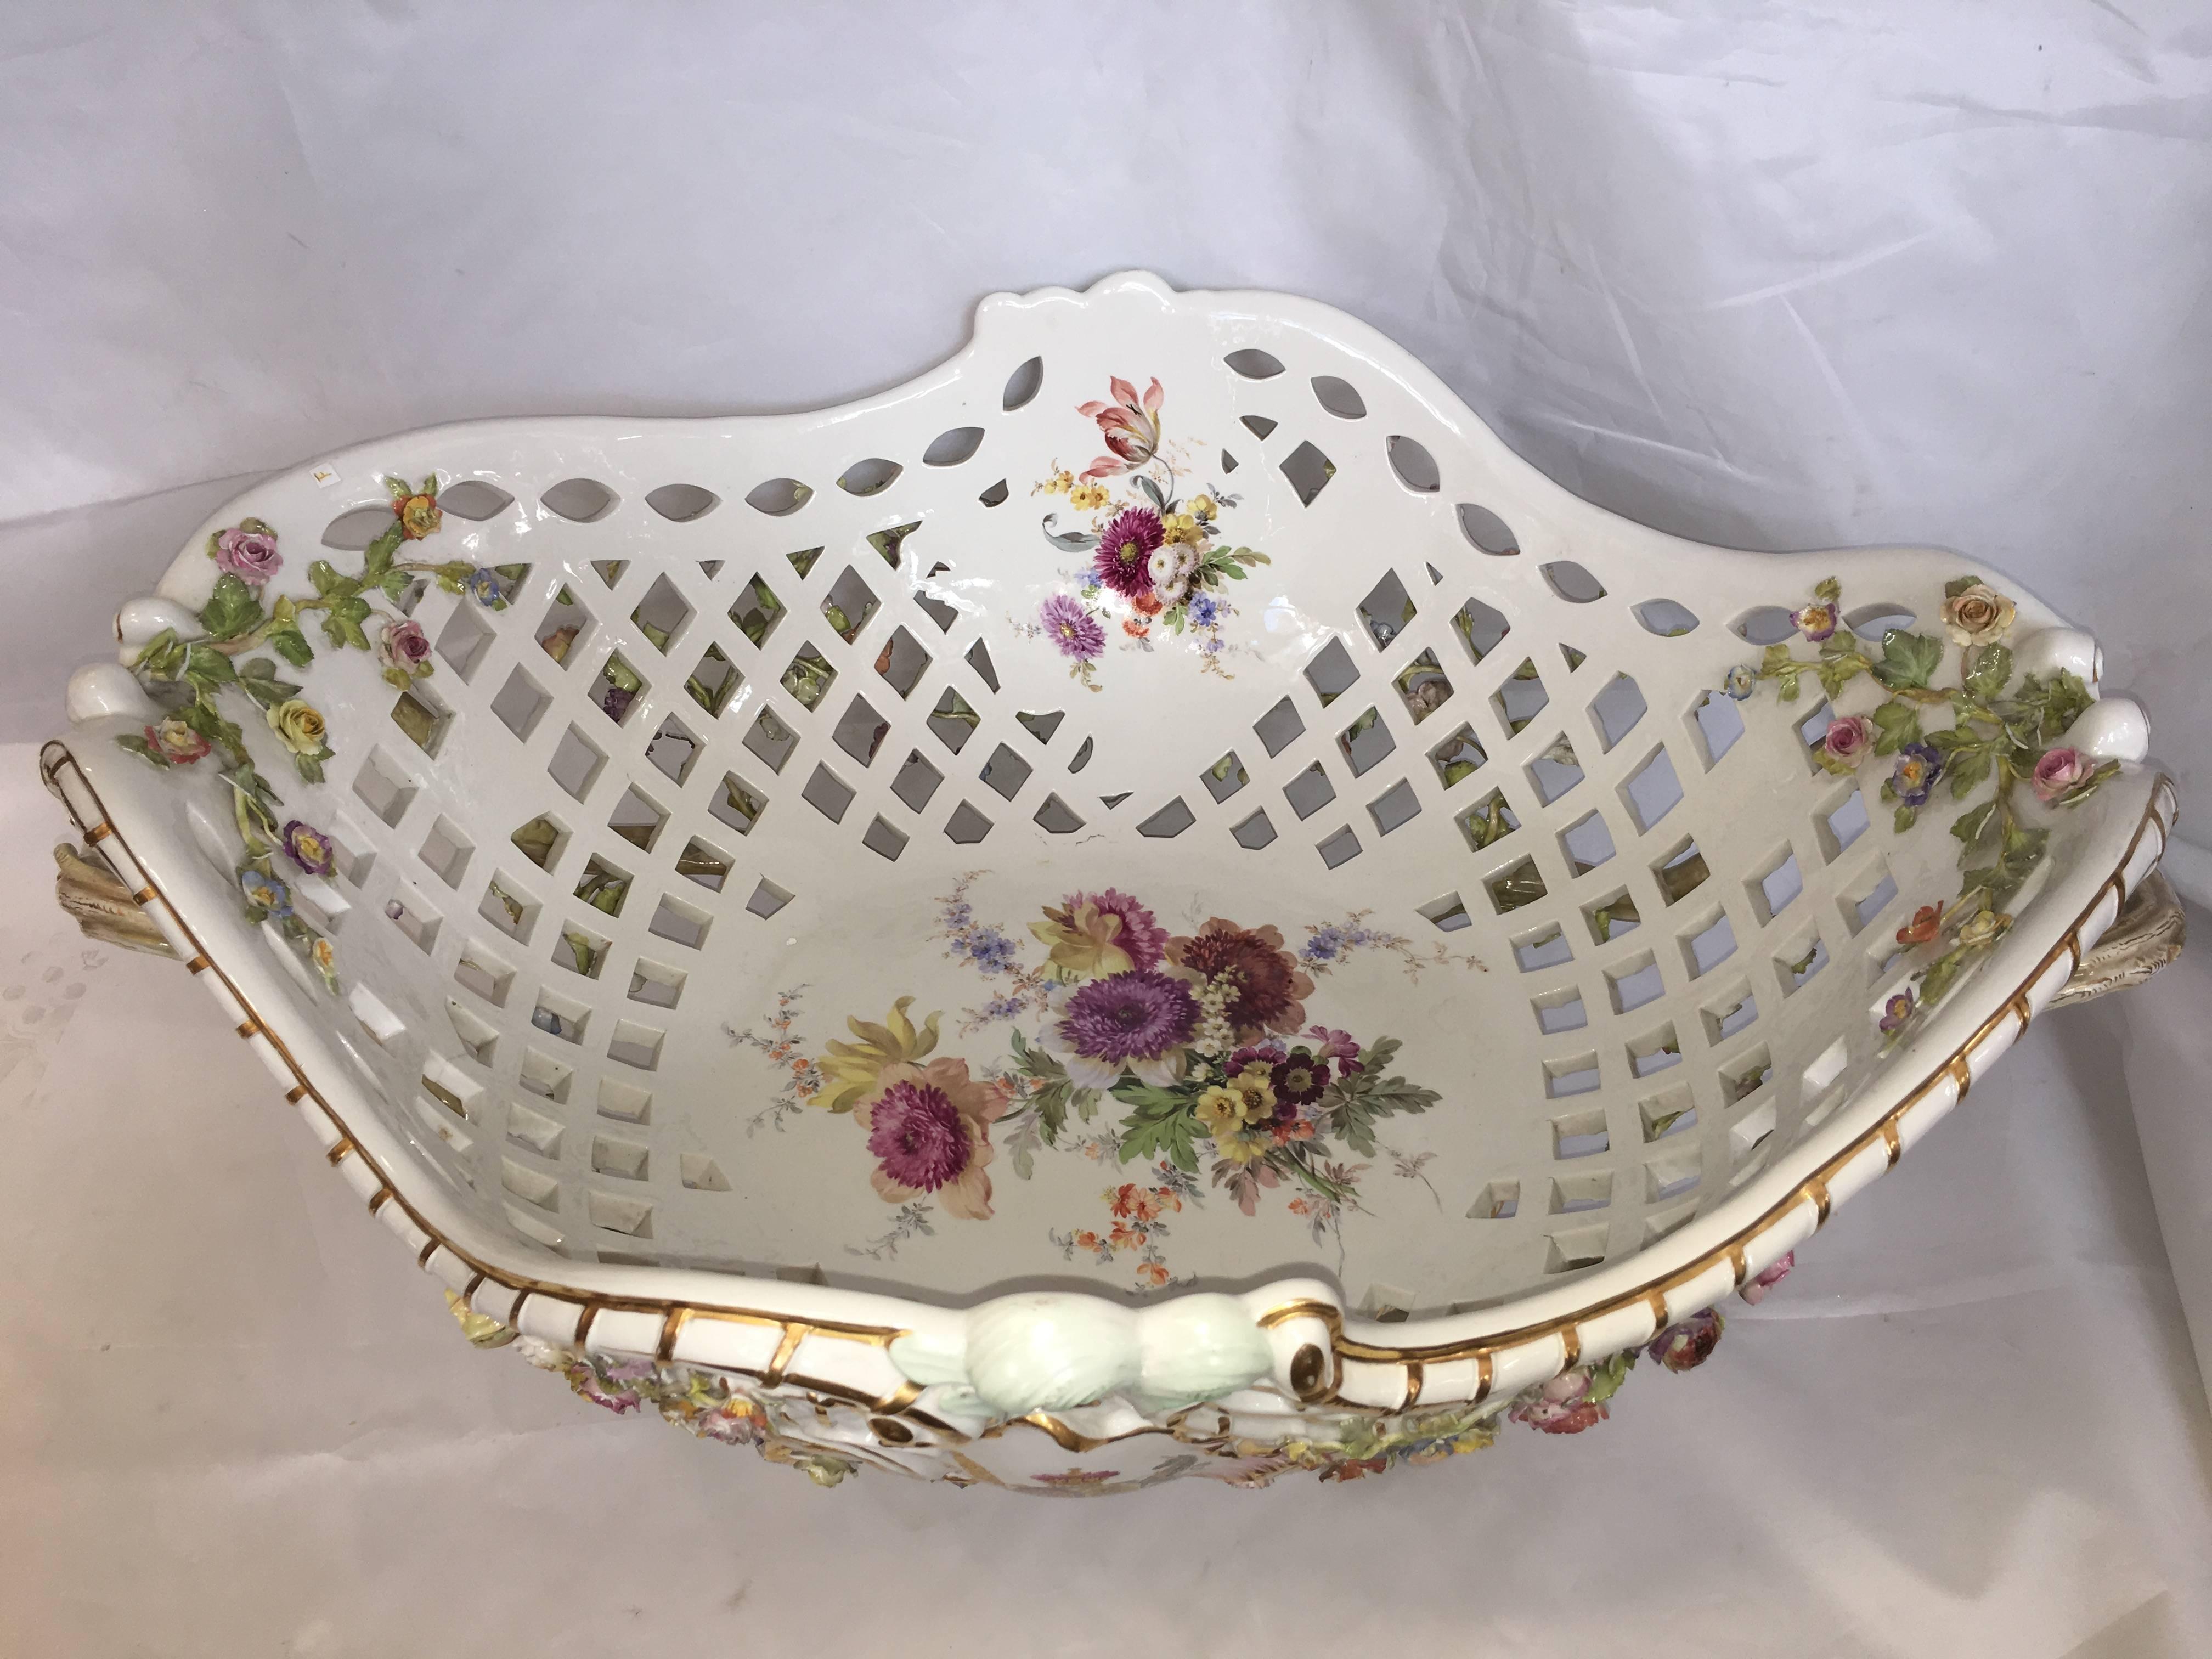 A monumental Meissen reticulated flower-encrusted basket
Late 19th-early 20th century, blue crossed swords mark, IMPRESSED C.6., IMPRESSED 79, PAINTED 14.
Of rocaille-moulded lozenge form, the interior painted with a loose bouquet and two flower